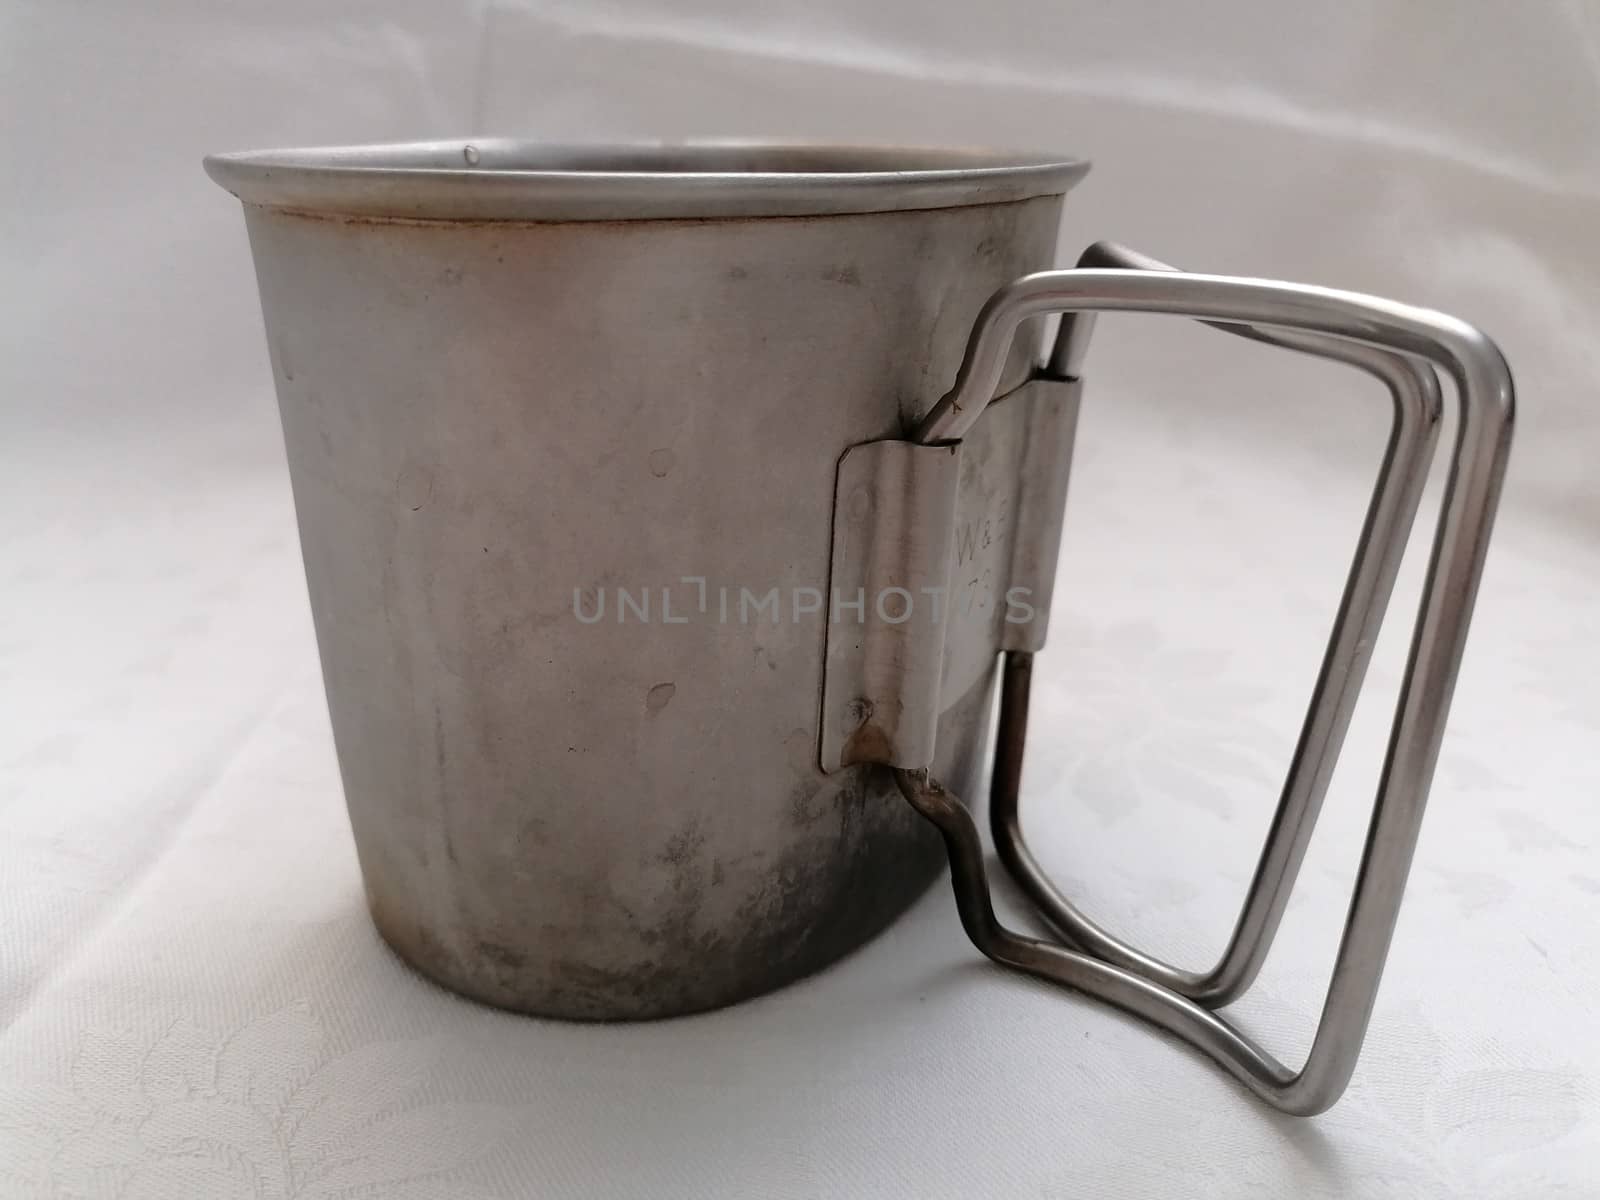 Crusader cup or mug. Tin metal stainless army mug for survival kits and forces by AndrewUK